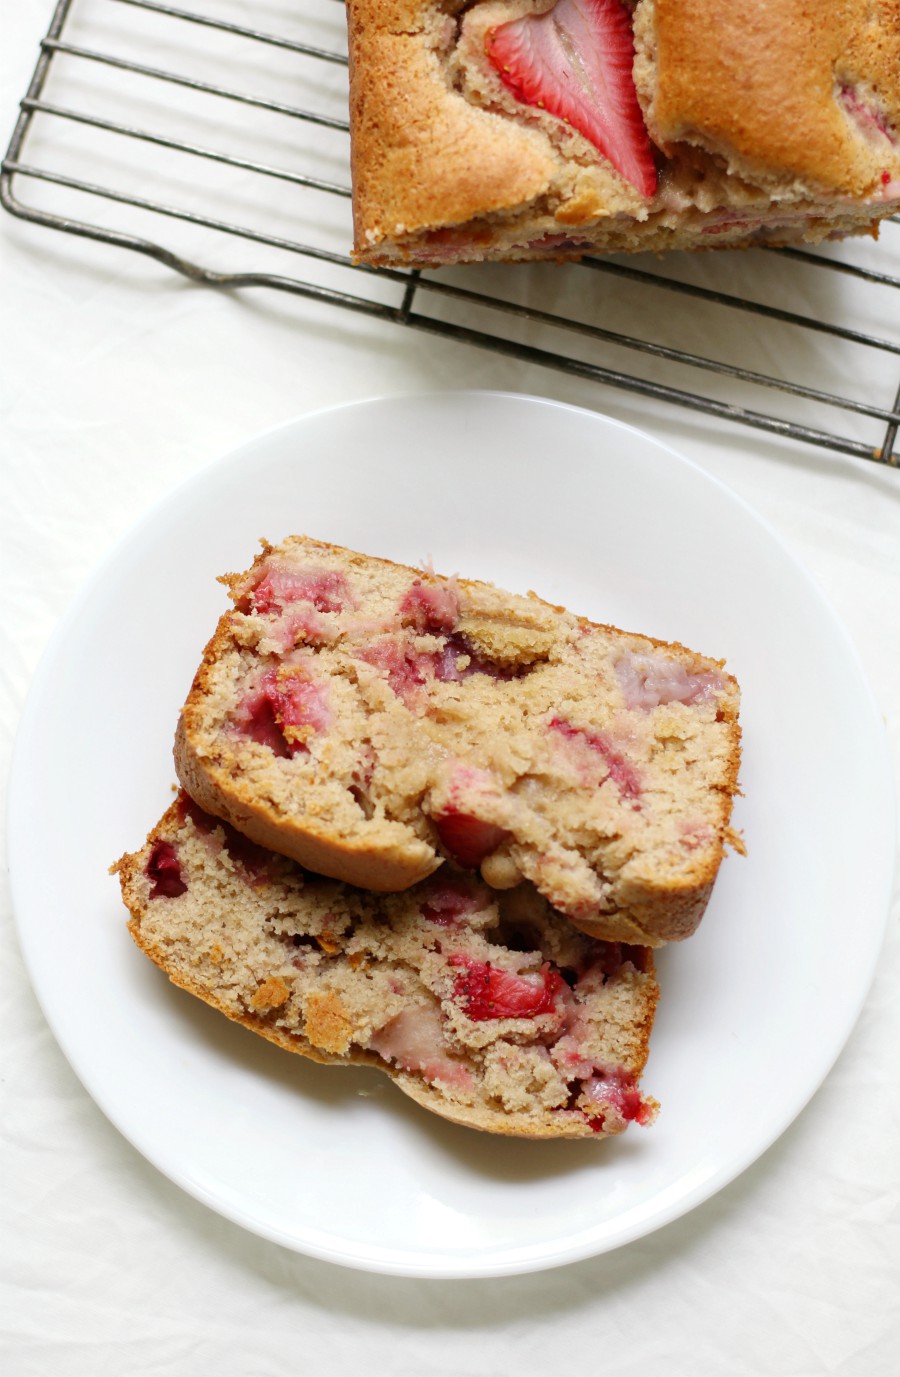 Gluten-Free Strawberry Quick Bread (Vegan, Allergy-Free) | Strength and Sunshine @RebeccaGF666 Put those ripe strawberries to good use in this healthy, sweet, and delicious quick bread recipe! This Gluten-Free Strawberry Quick Bread is vegan, allergy-free, and perfect for breakfast, brunch, dessert, or as a seasonal snack! It's spring and summer baking at its finest! 